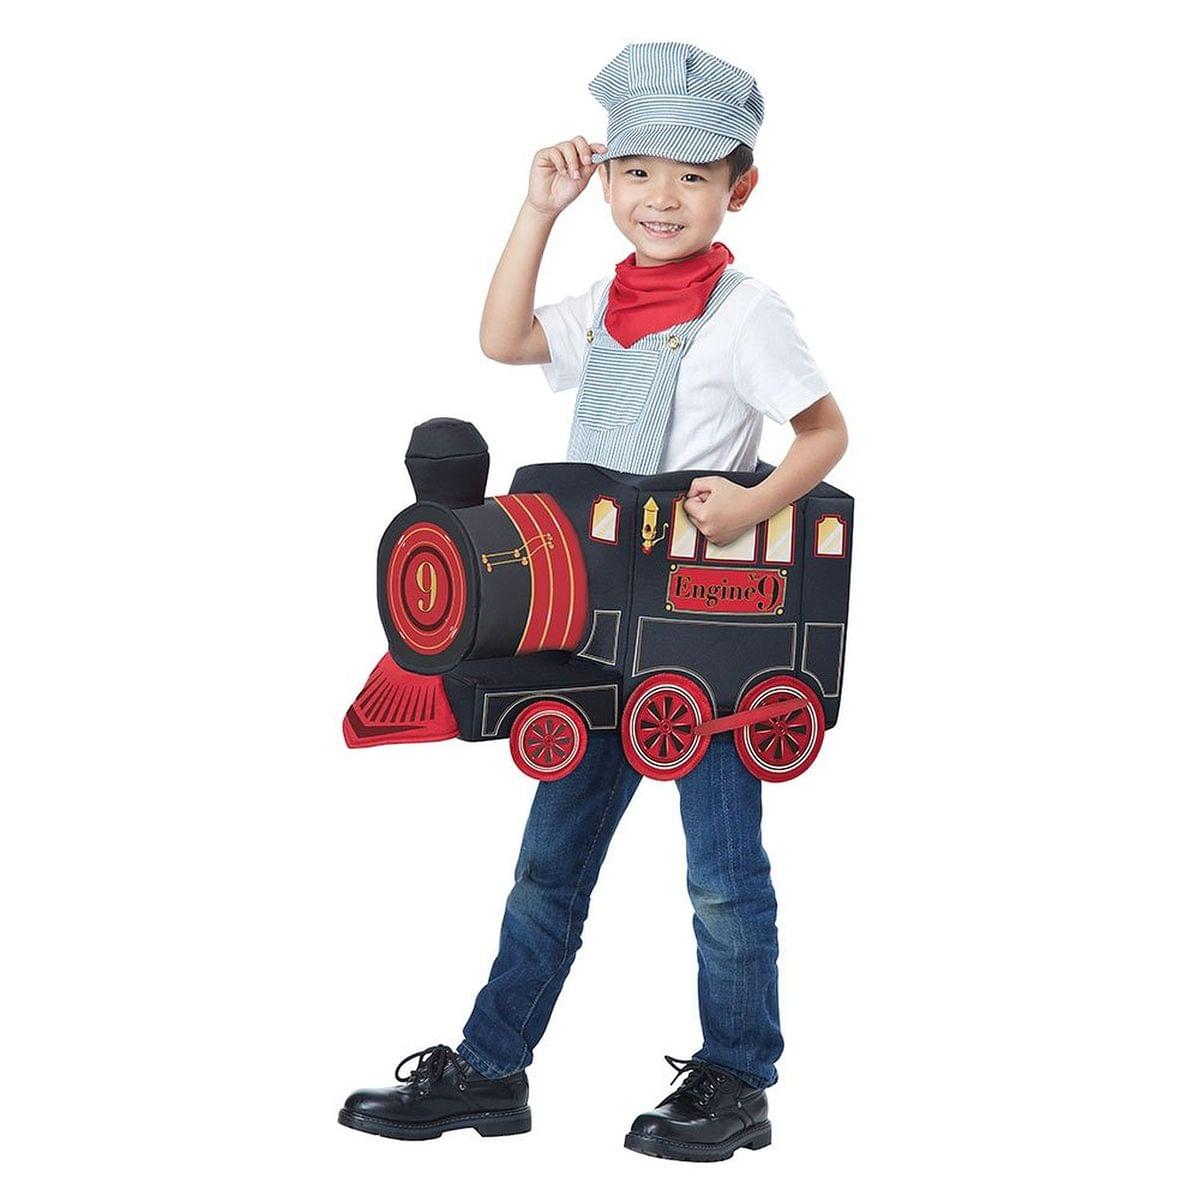 All Aboard! Train Rider Child Costume One Size Fits Most